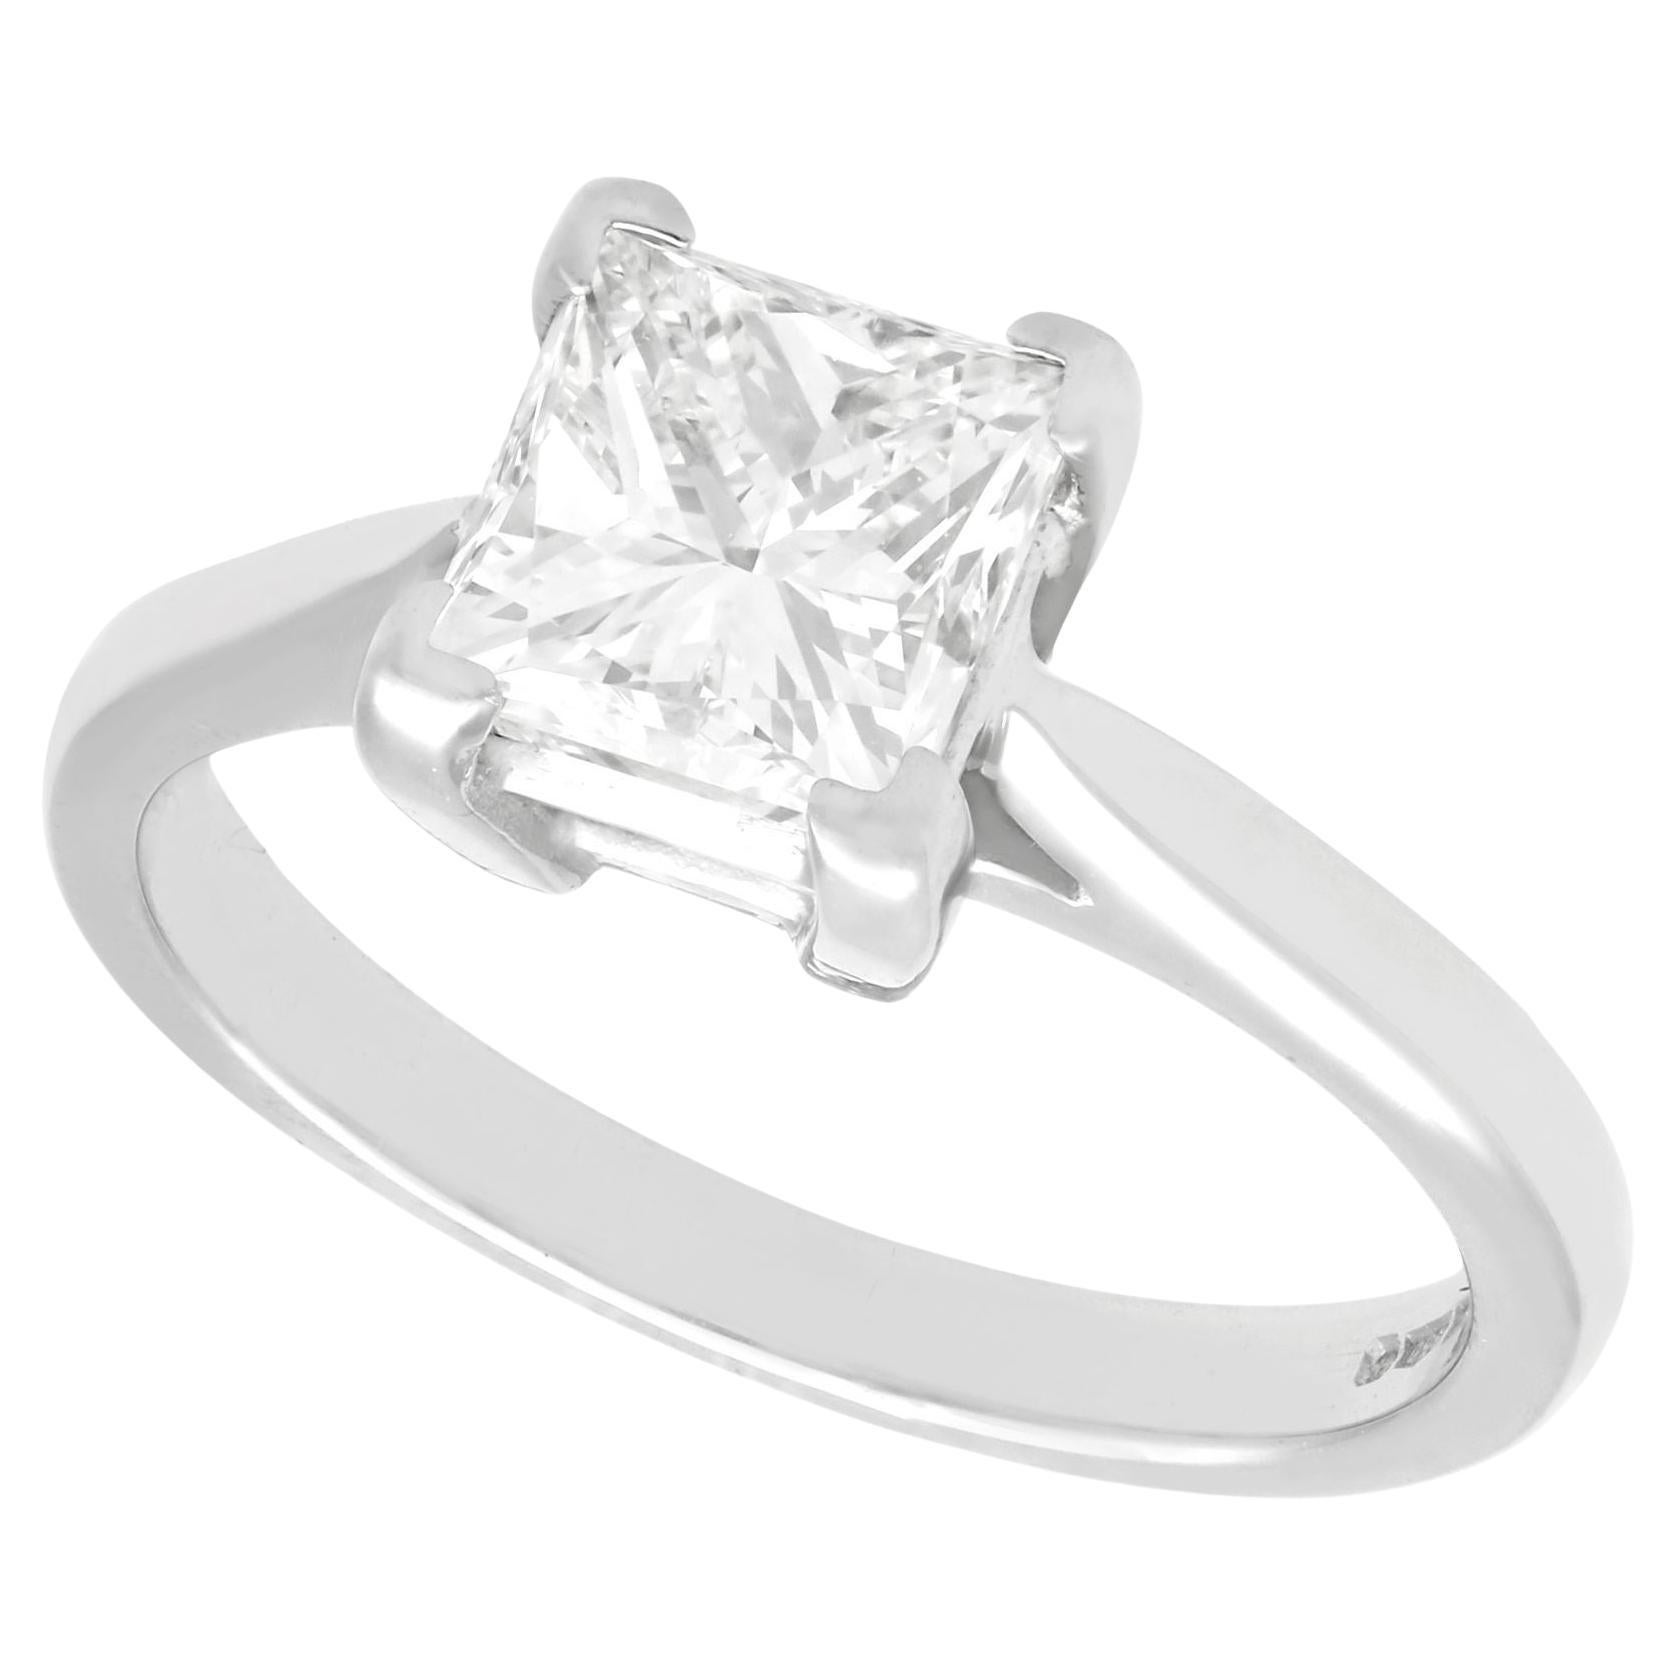 1.22 Carat Diamond and Platinum Solitaire Engagement Ring For Sale